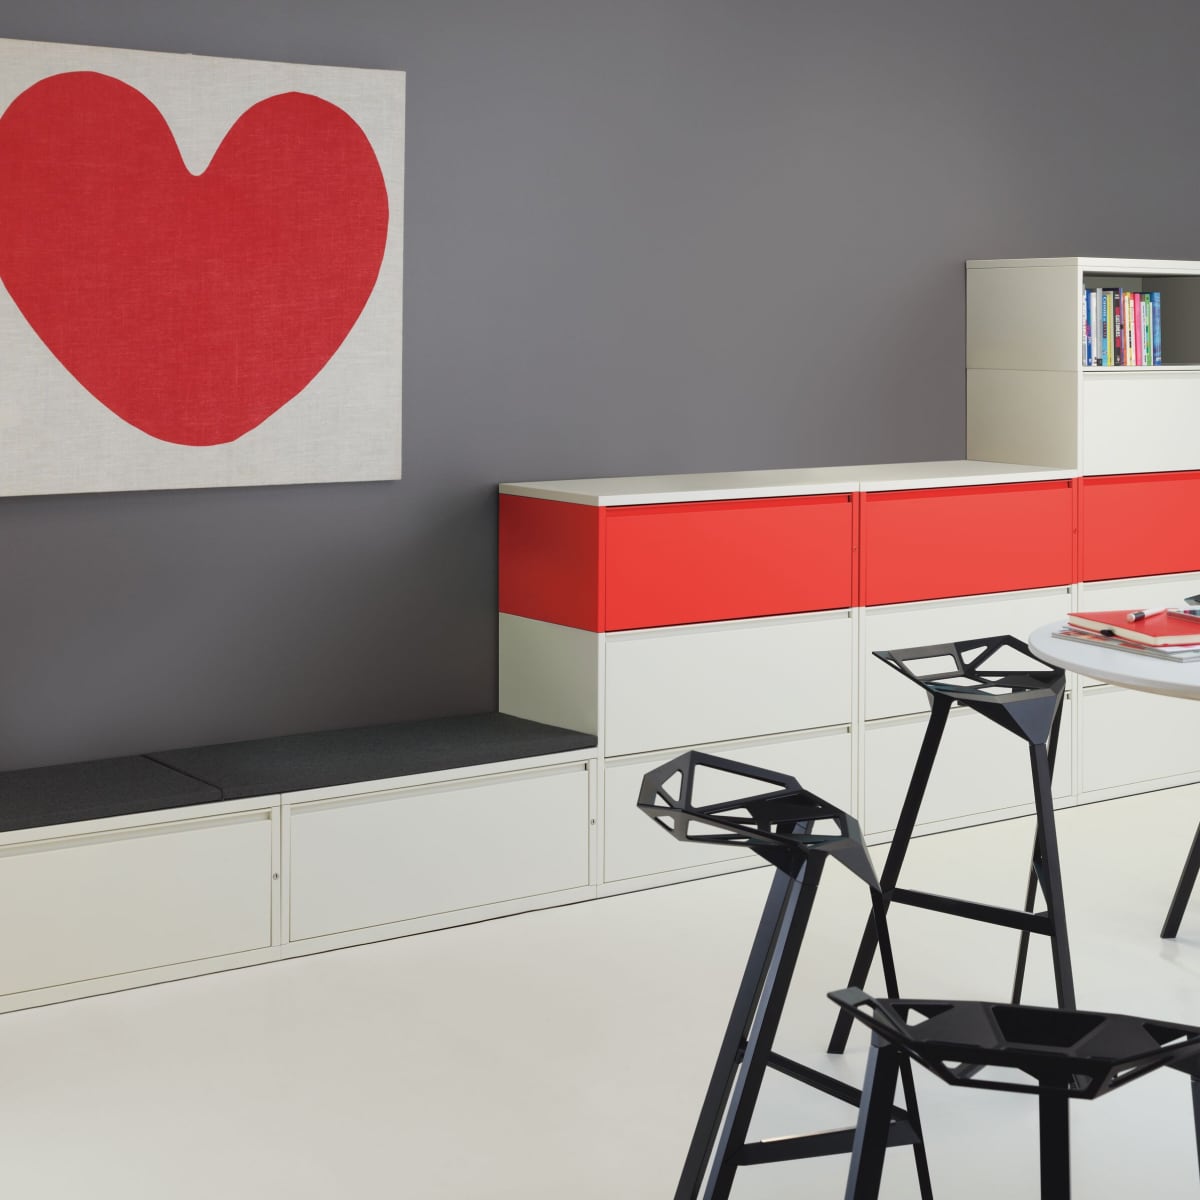 White and red Meridian Storage lateral files stacked on top of each other with black and white laminate tops and collaborative tables with stools in the foreground.